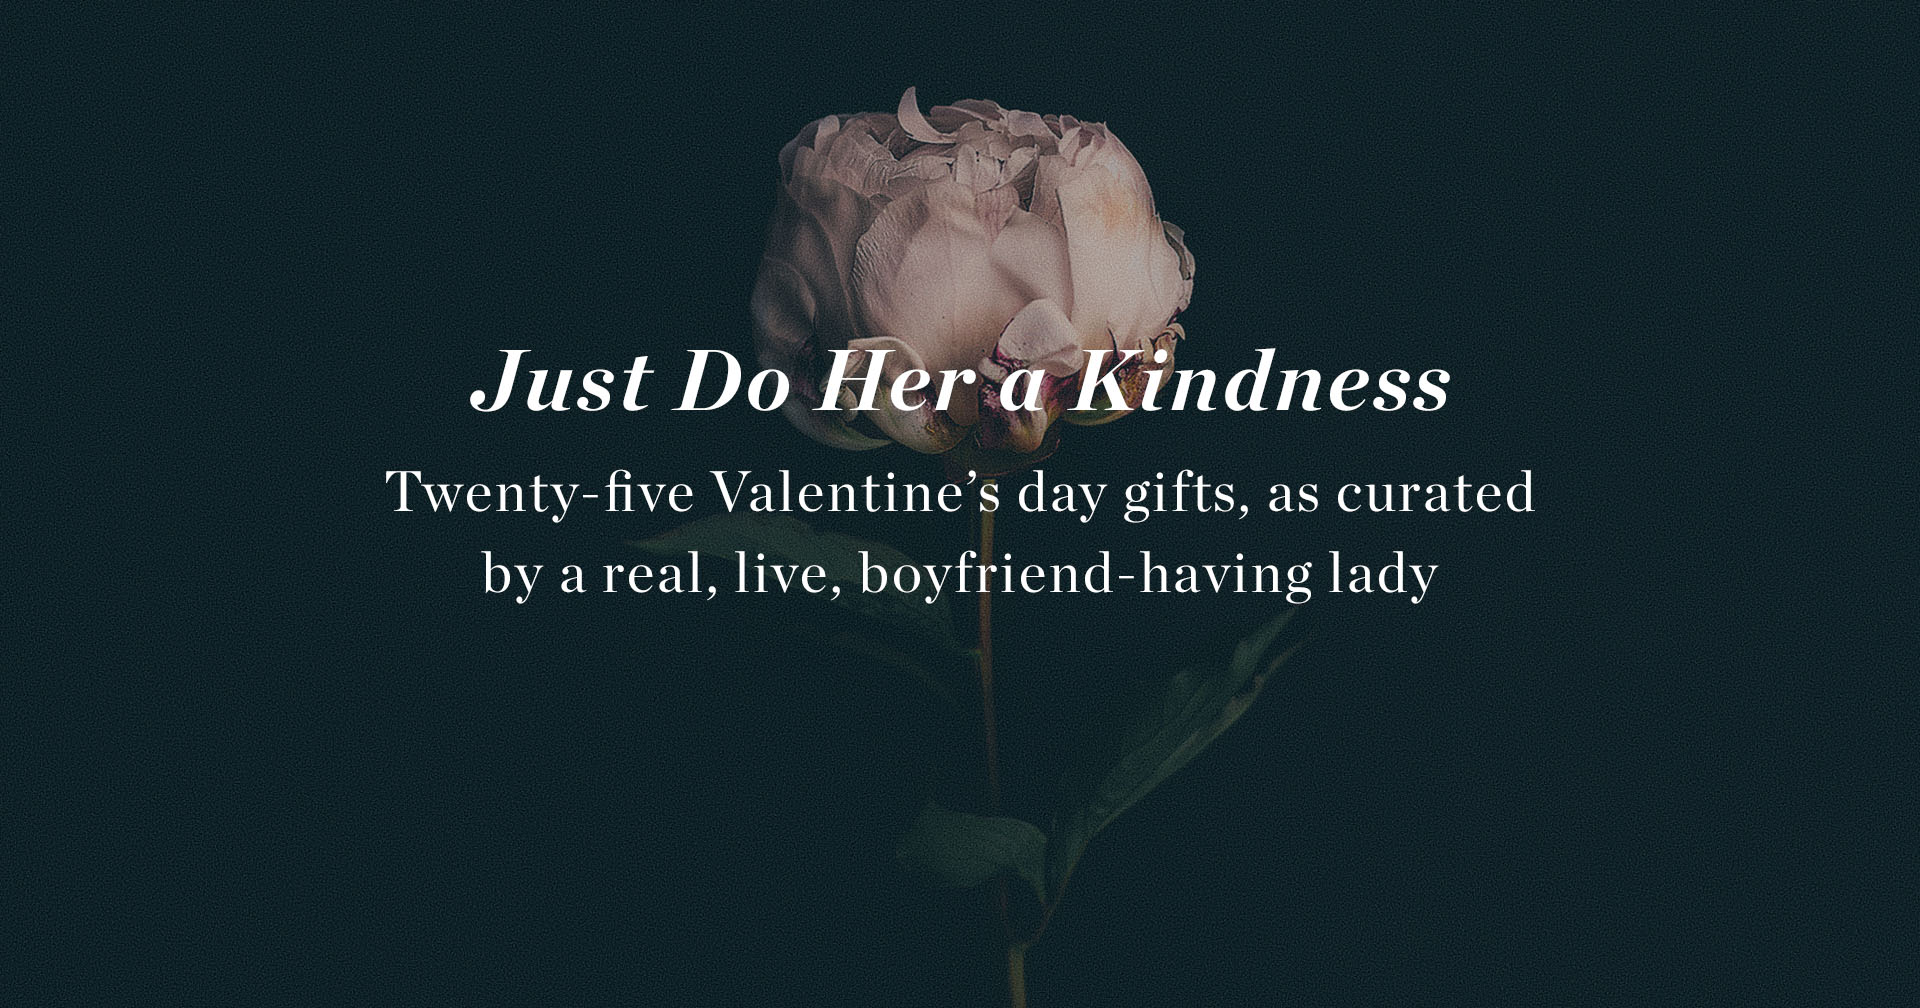 25 Valentine’s Day Gifts for Her